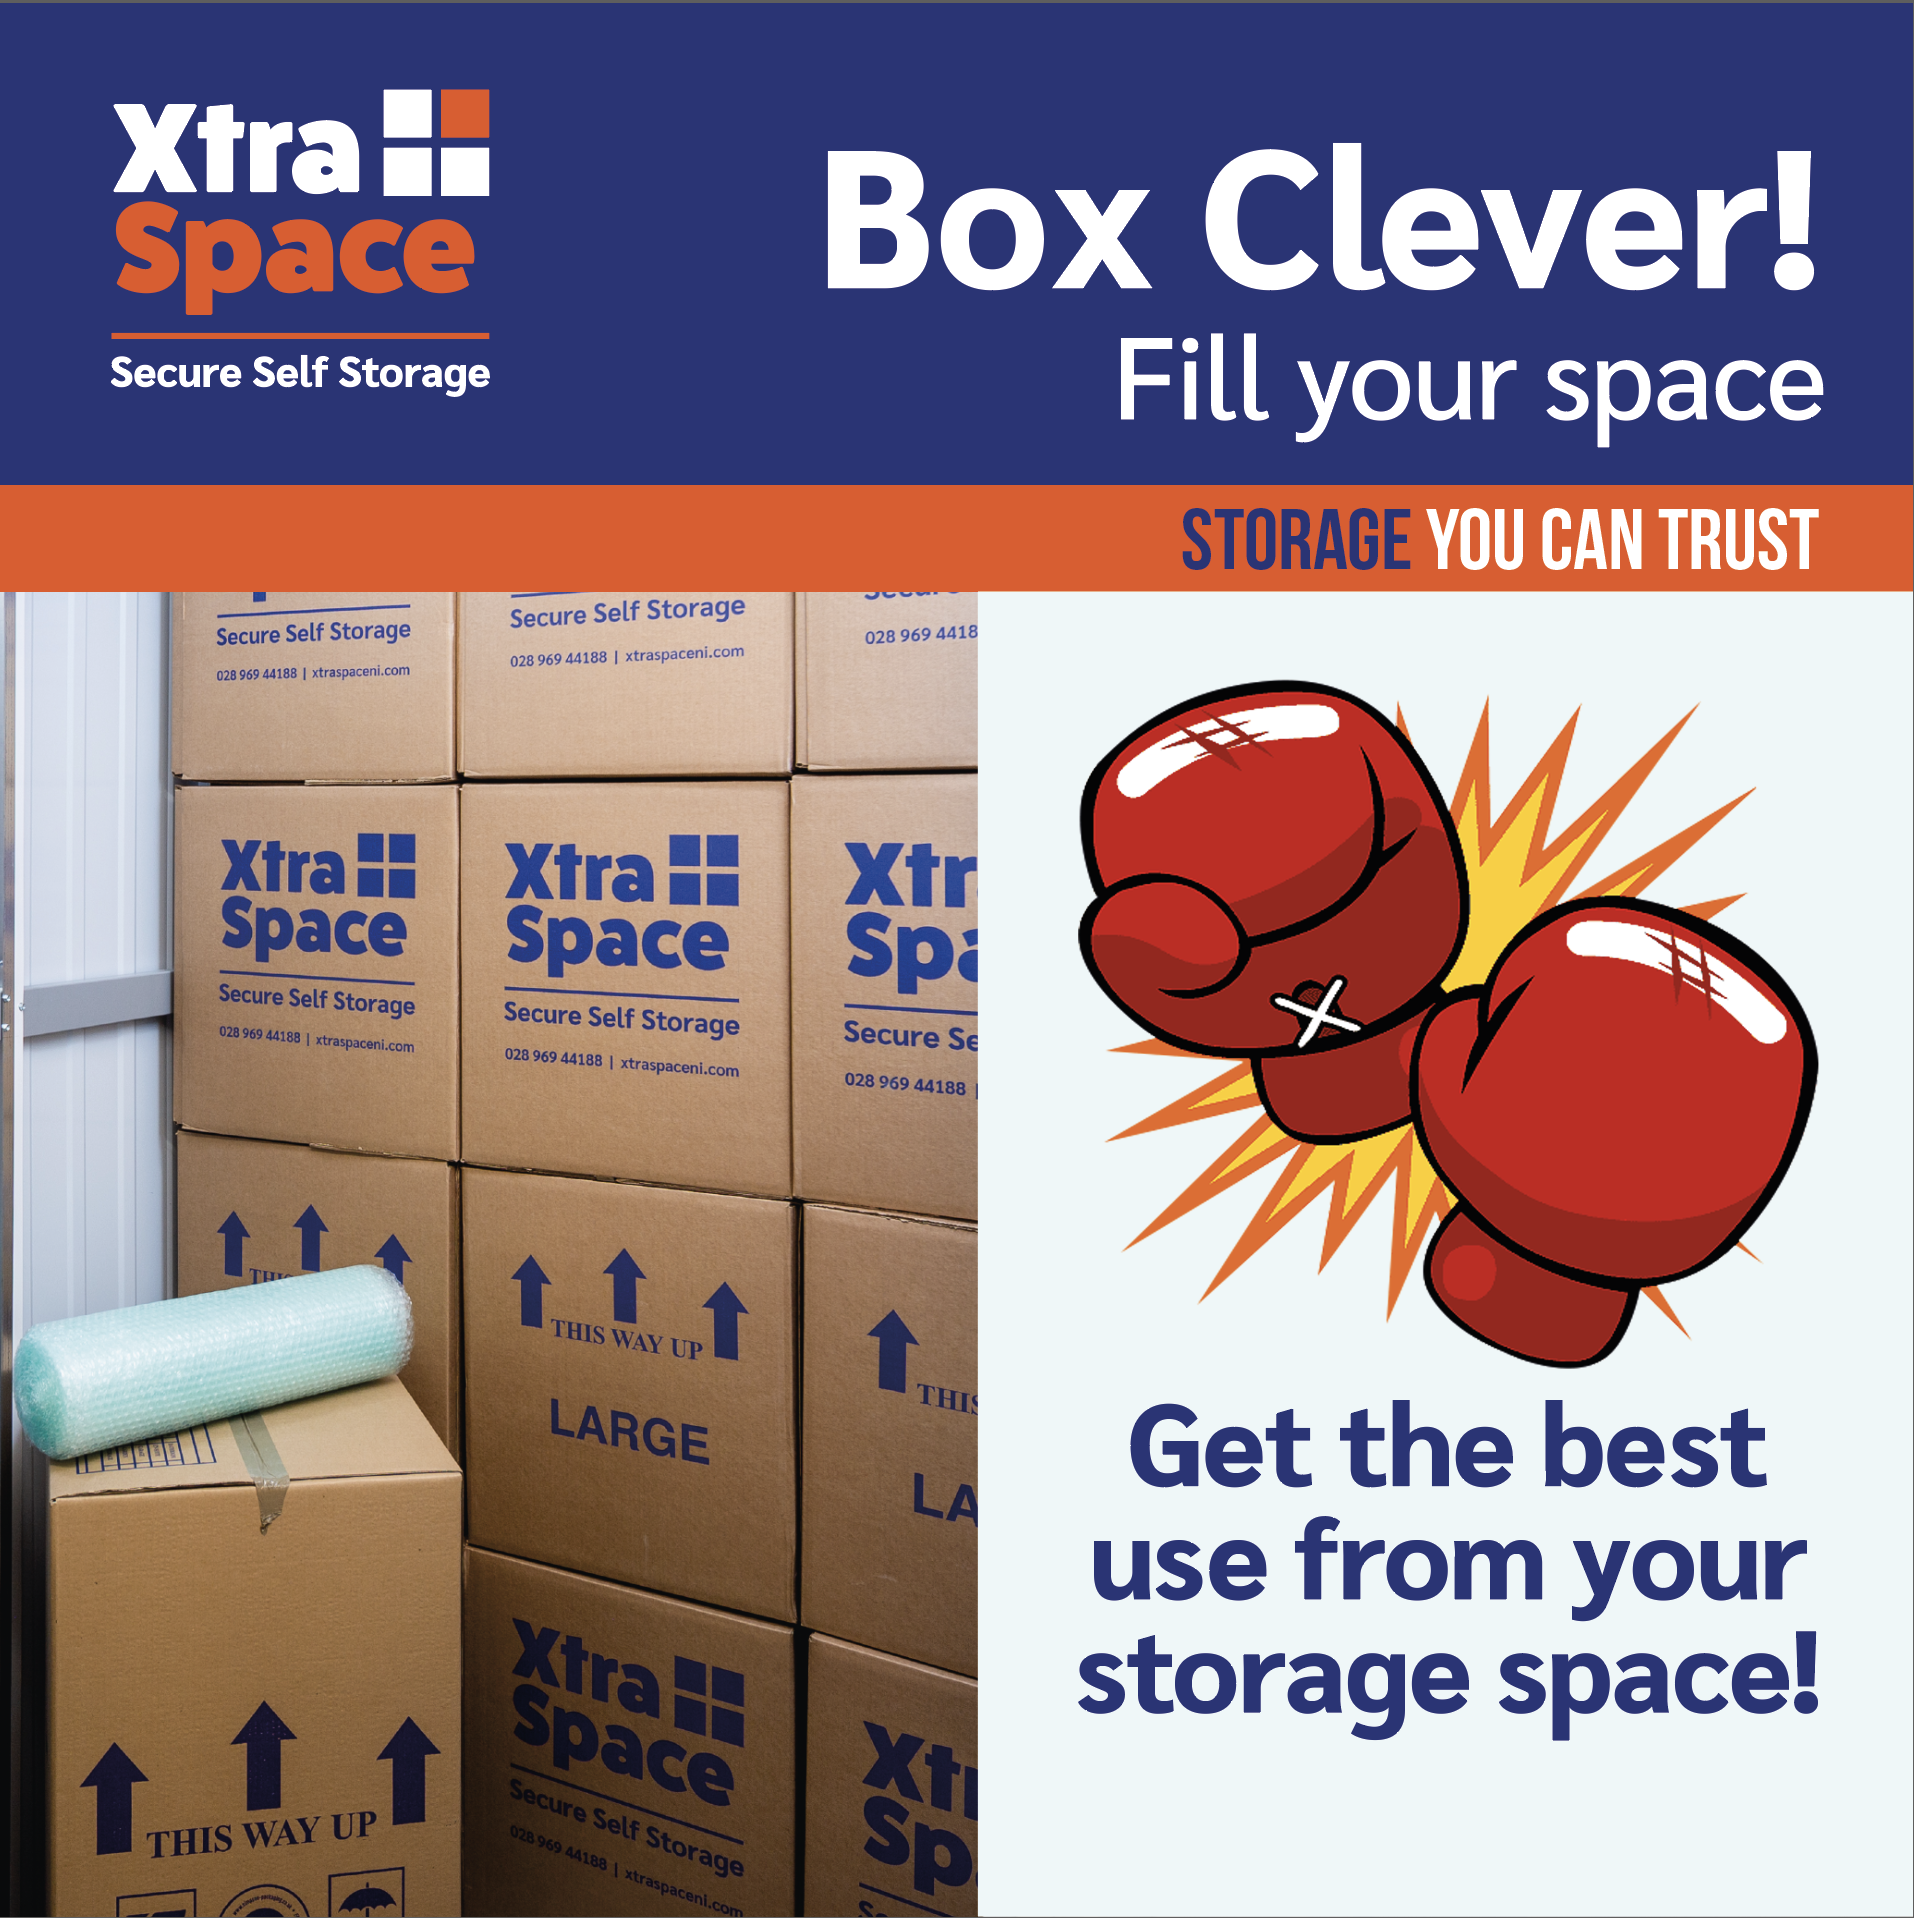 box clever - xtra space self storage